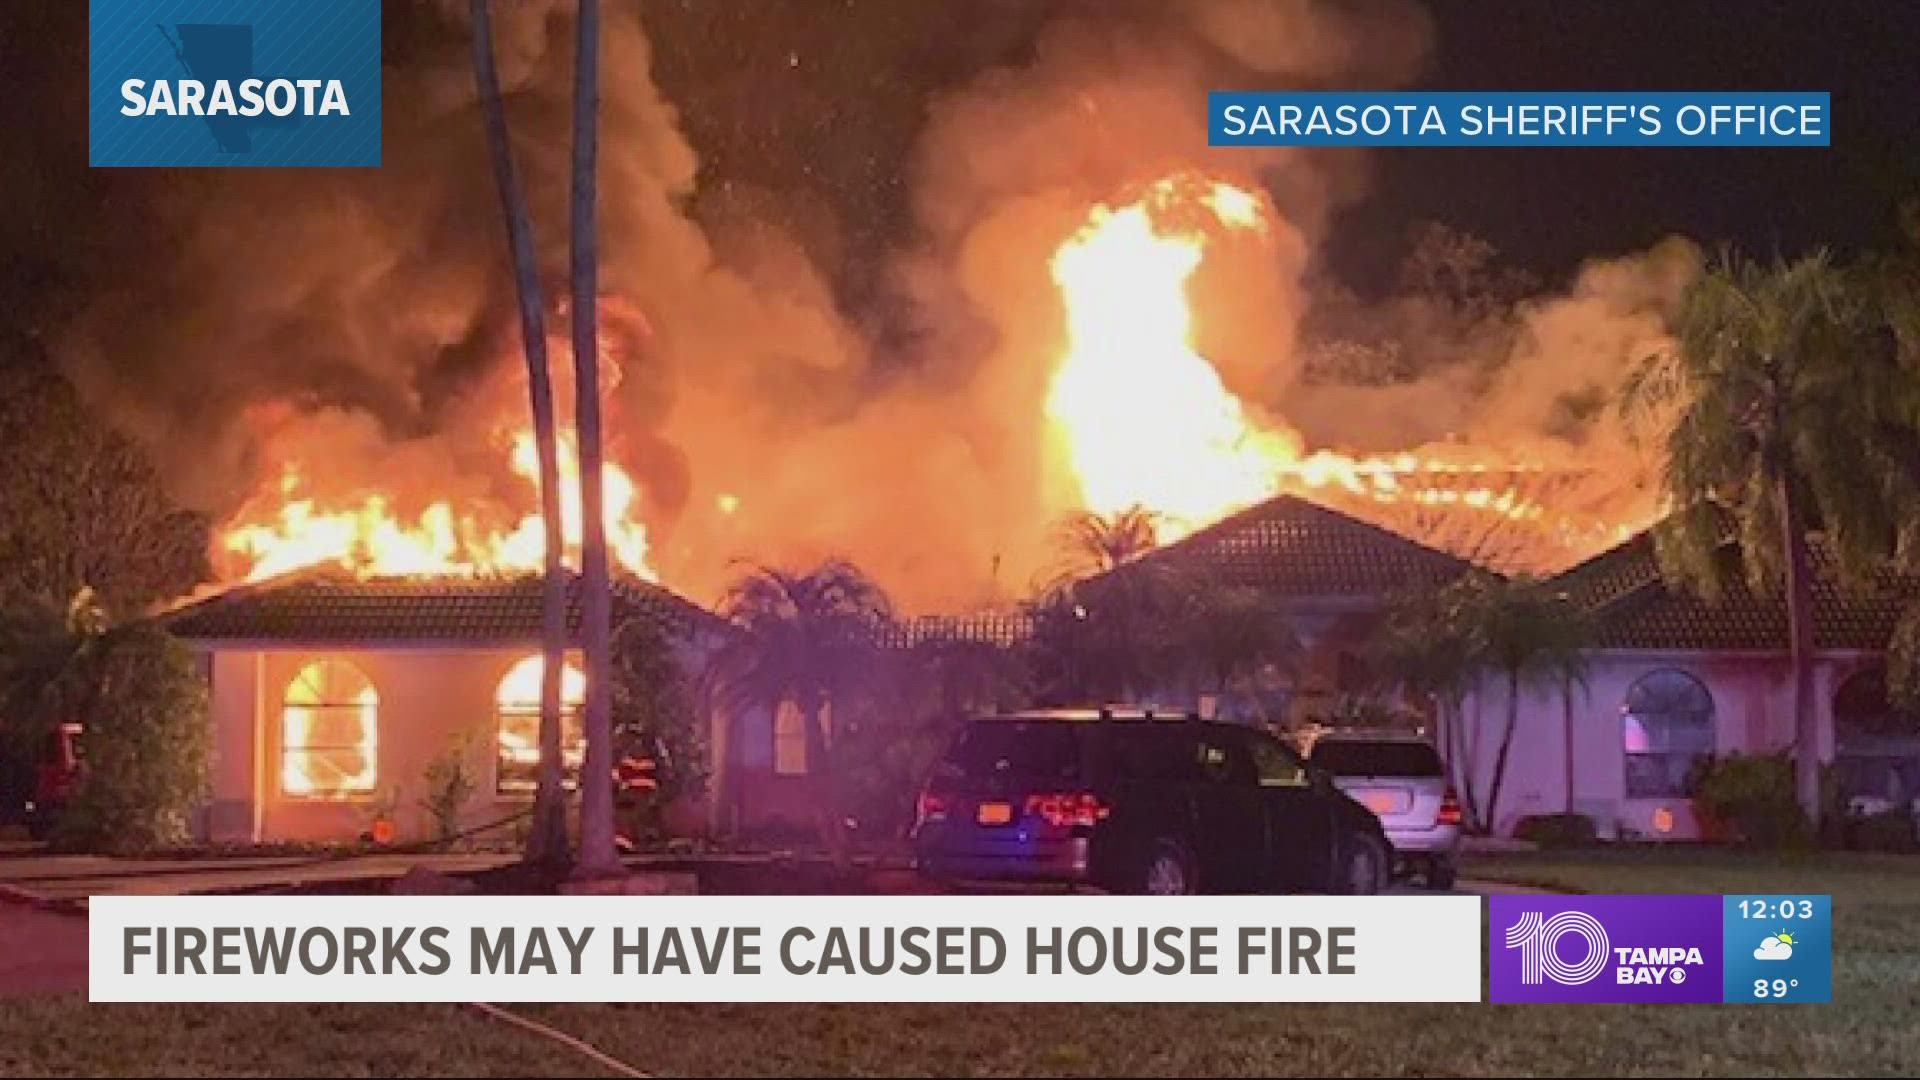 Everyone who lived in the home is safe, deputies said.